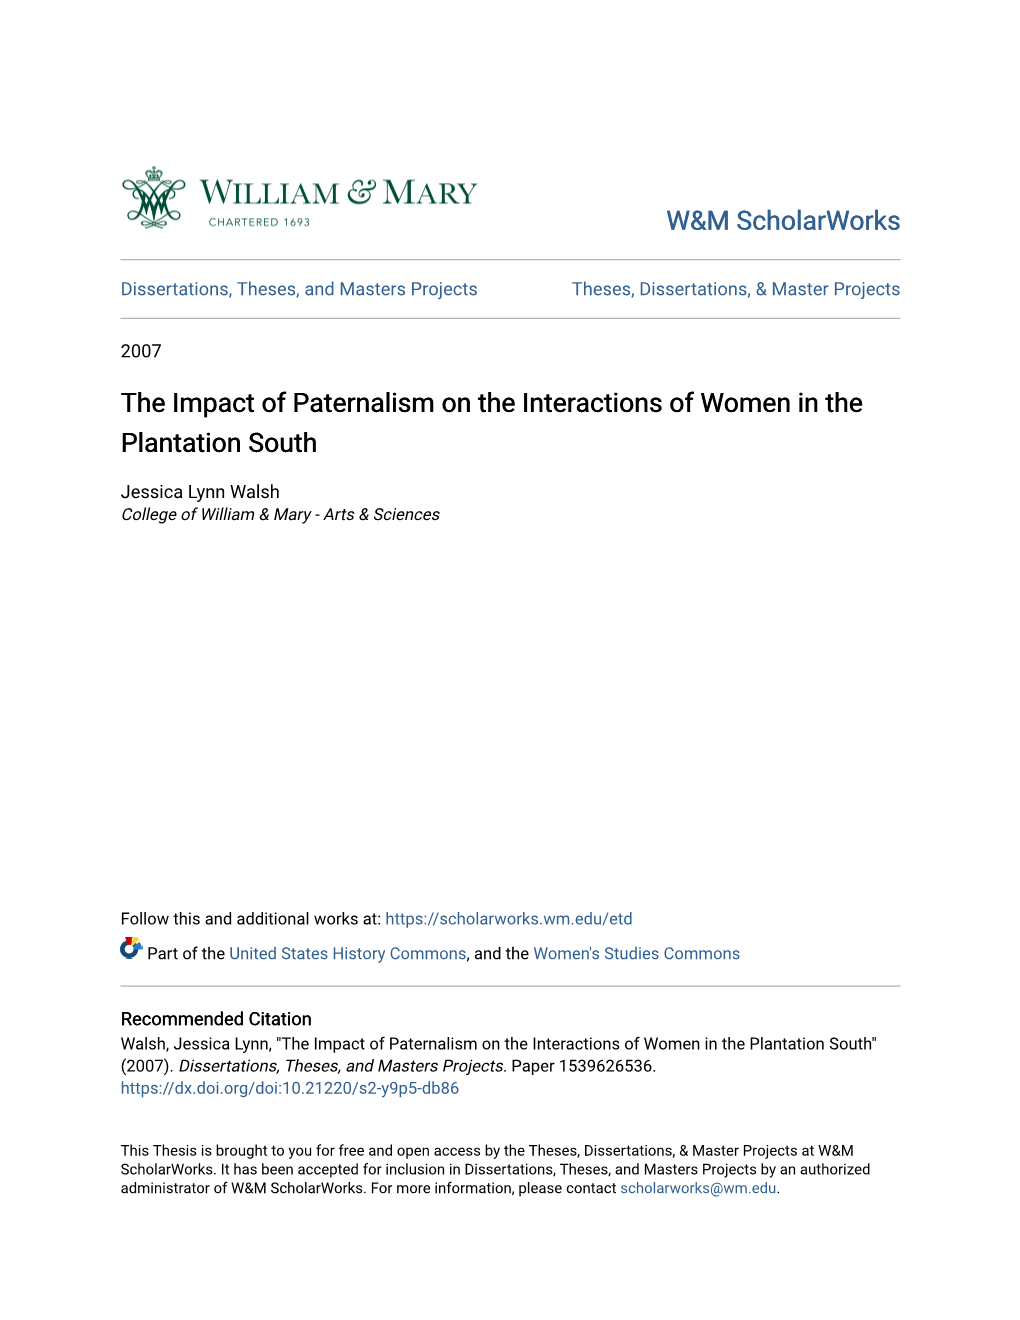 The Impact of Paternalism on the Interactions of Women in the Plantation South